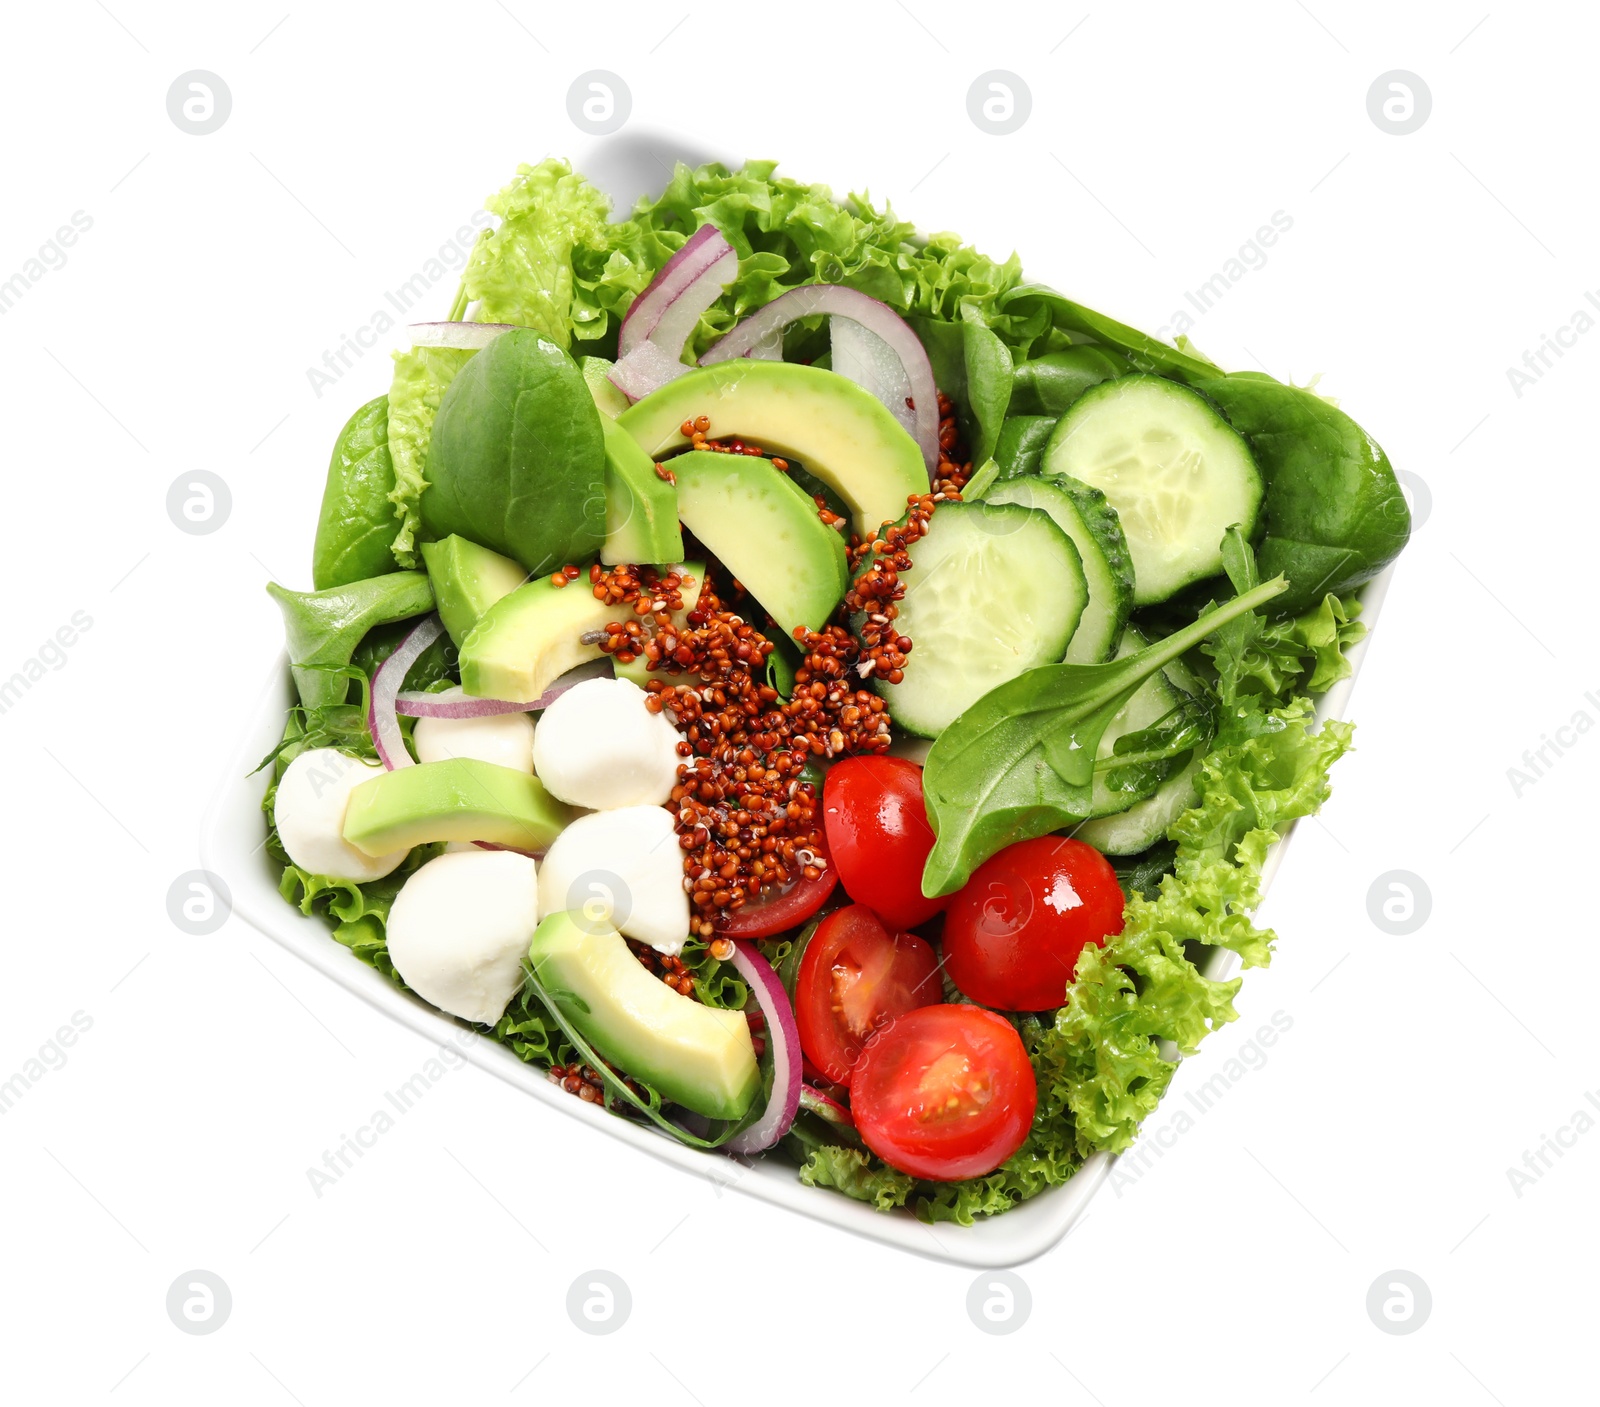 Image of Delicious salad with avocado and quinoa on white background, top view